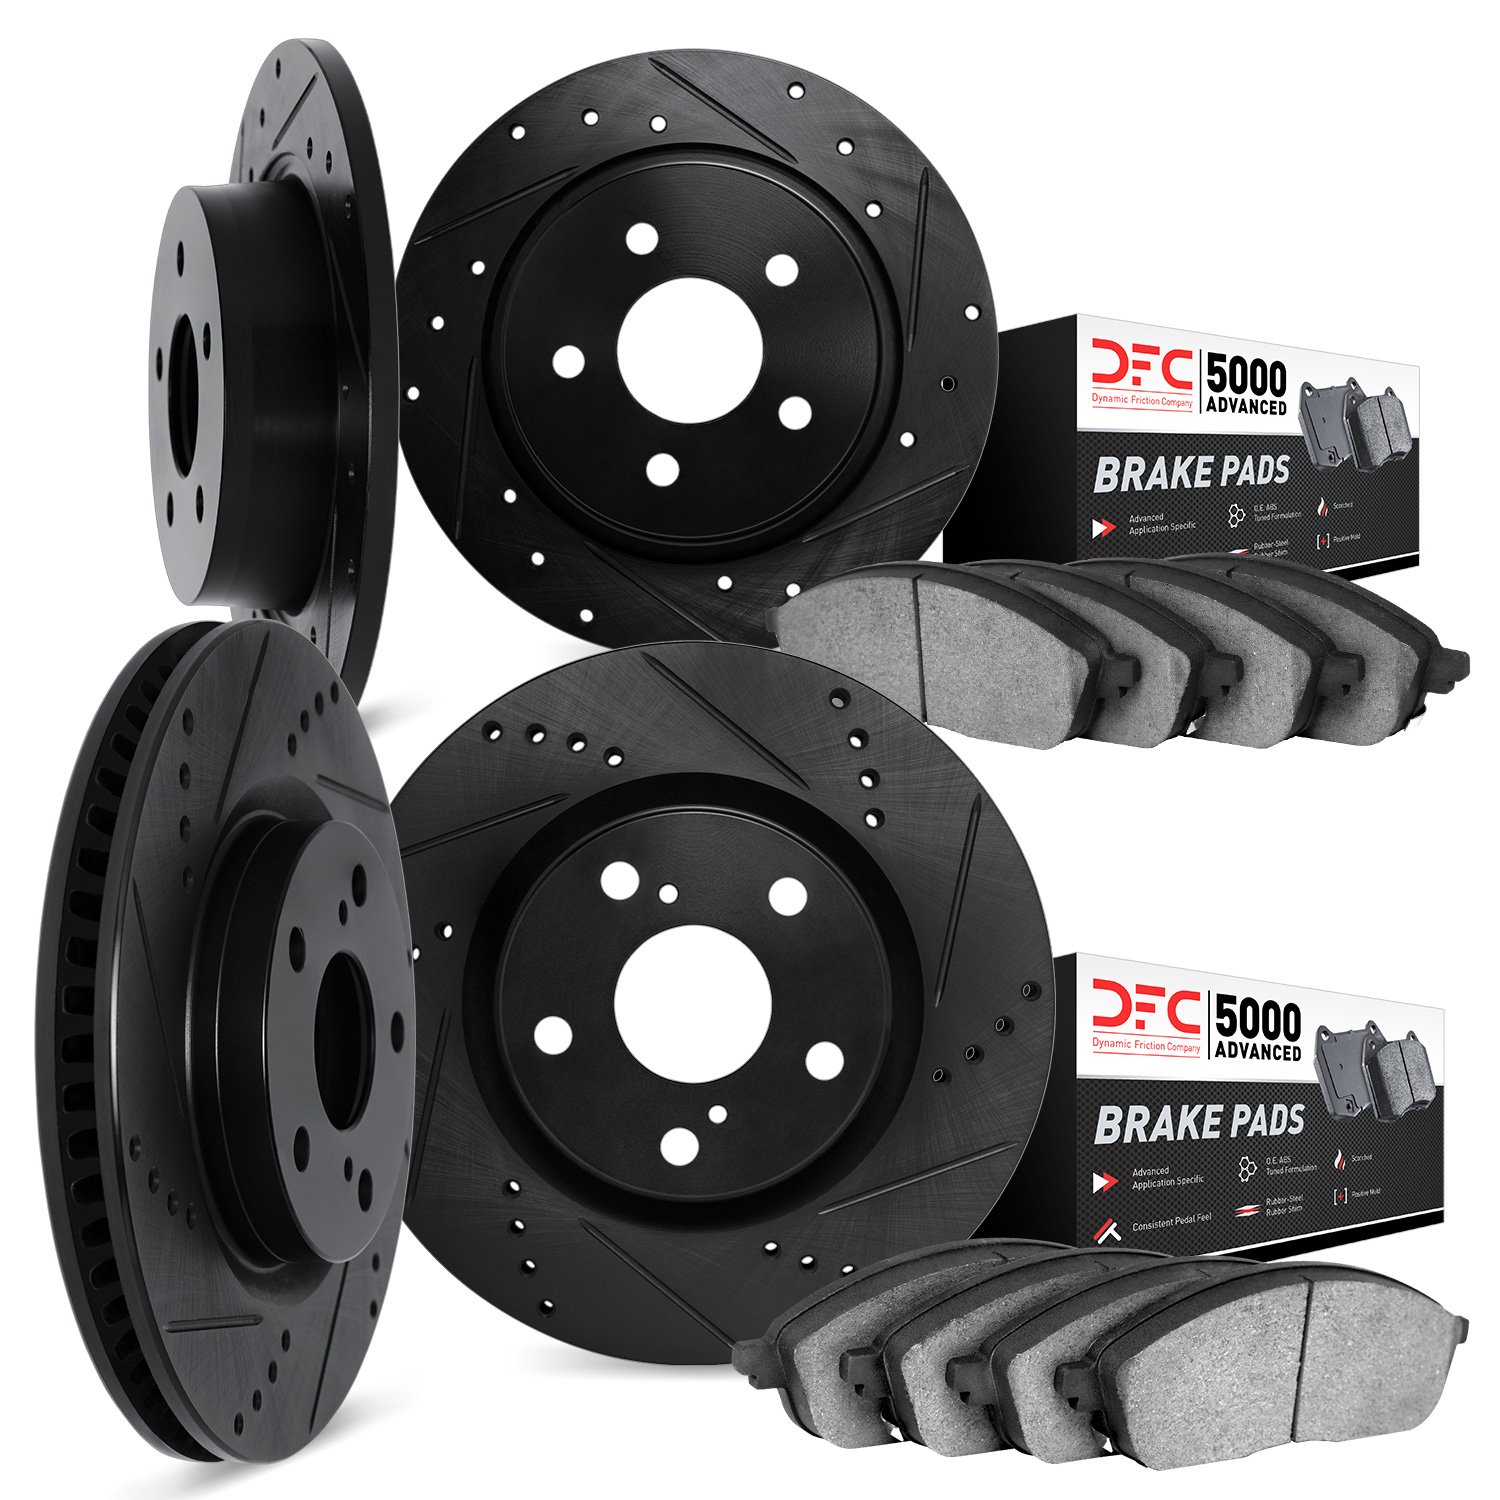 8504-32013 Drilled/Slotted Brake Rotors w/5000 Advanced Brake Pads Kit [Black], Fits Select Mini, Position: Front and Rear